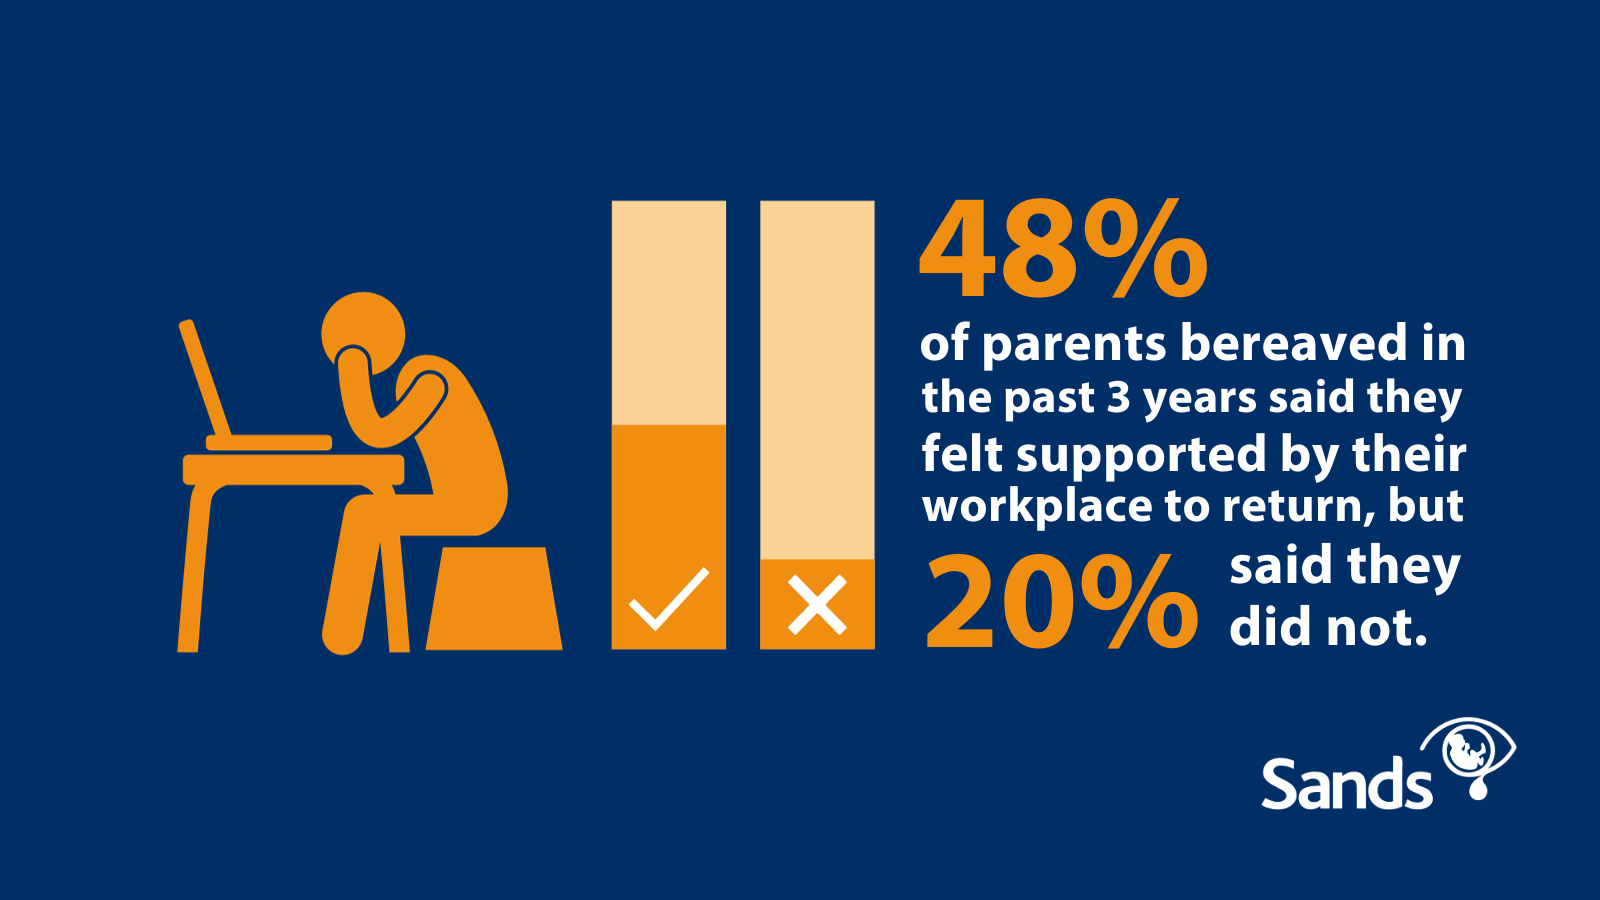 Image of someone sitting at a desk and text 48% of parents bereaved in the past 3 years said they felt supported by their workplace to return, but 20% said they did not.